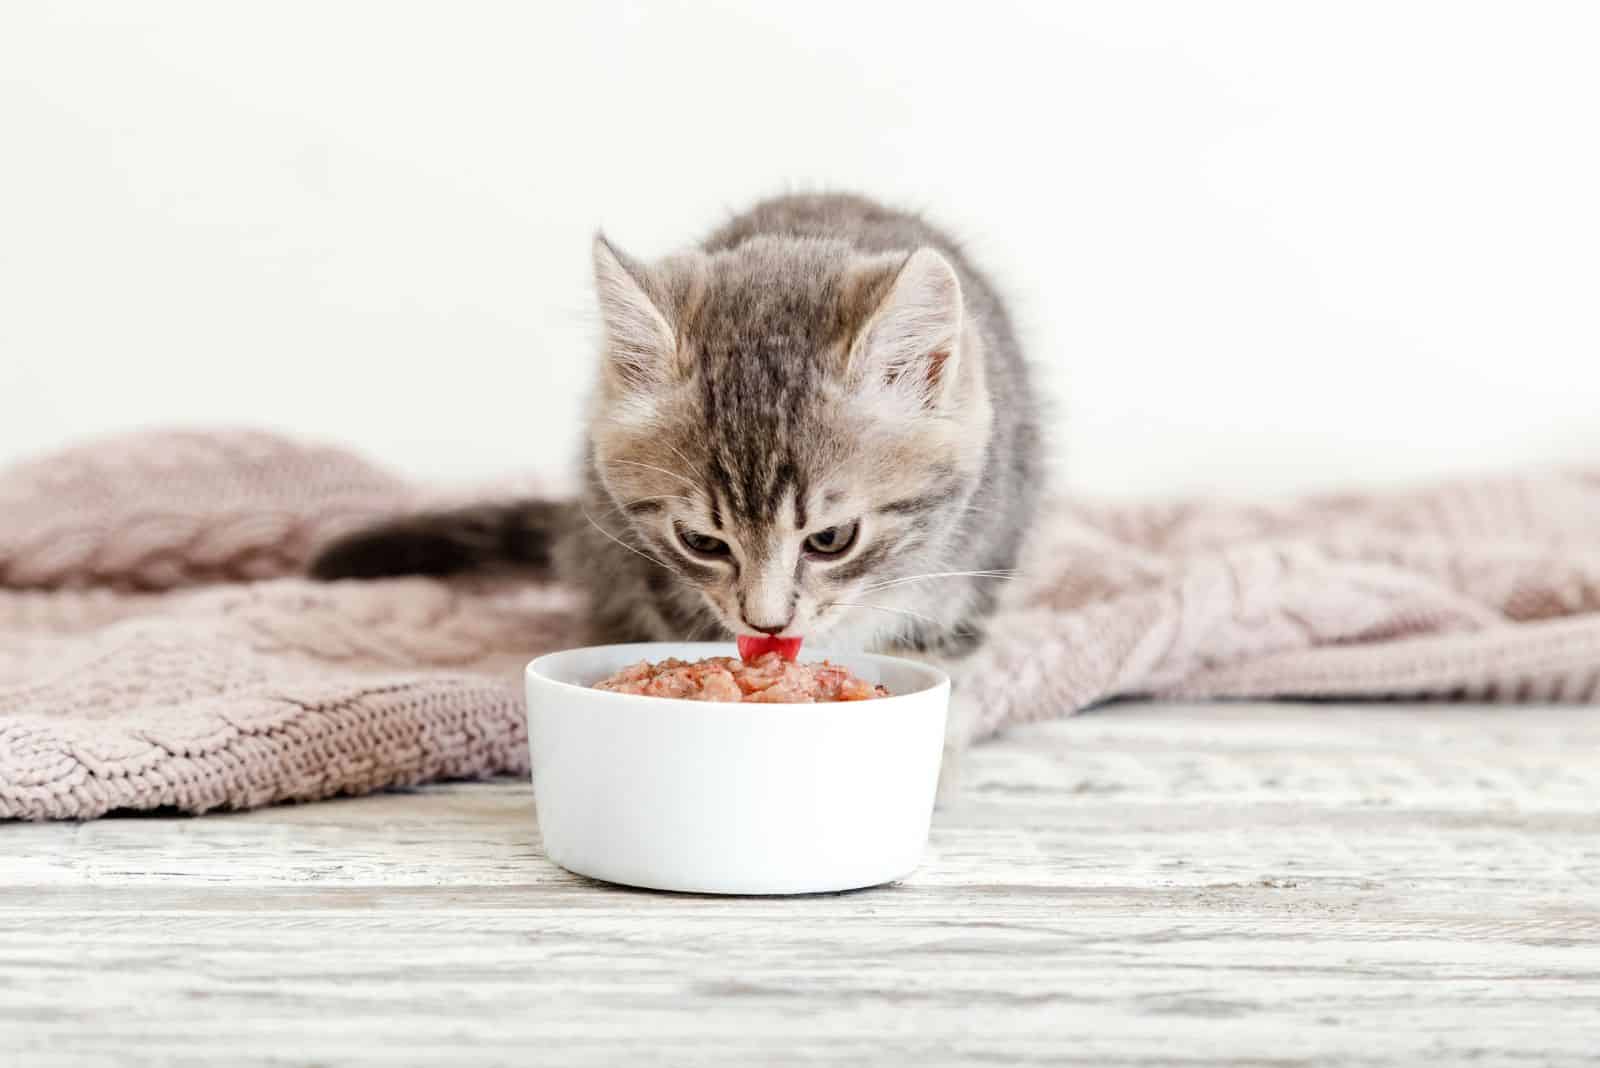 the kitten eats food from a white bowl